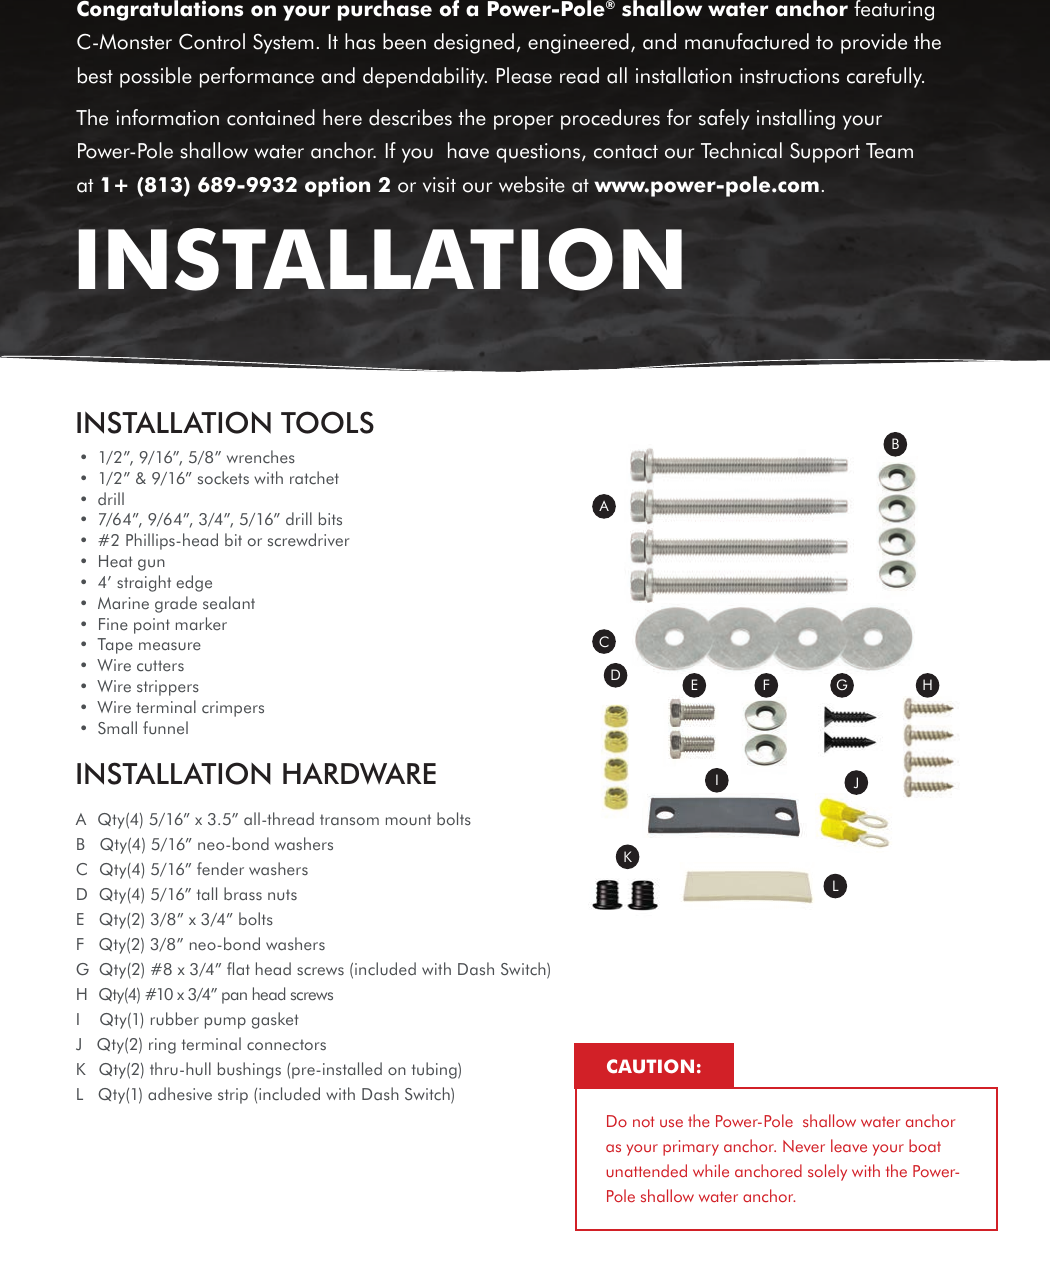 INSTALLATION TOOLS•  1/2”, 9/16”, 5/8” wrenches•  1/2” &amp; 9/16” sockets with ratchet•  drill•  7/64”, 9/64”, 3/4”, 5/16” drill bits•  #2 Phillips-head bit or screwdriver•  Heat gun•  4’ straight edge•  Marine grade sealant•  Fine point marker•  Tape measure•  Wire cutters•  Wire strippers•  Wire terminal crimpers•  Small funnelINSTALLATION HARDWAREACDE F G HIJKLBA  Qty(4) 5/16” x 3.5” all-thread transom mount boltsB   Qty(4) 5/16” neo-bond washersC  Qty(4) 5/16” fender washersD   Qty(4) 5/16” tall brass nutsE   Qty(2) 3/8” x 3/4” boltsF   Qty(2) 3/8” neo-bond washersG  Qty(2) #8 x 3/4” ﬂat head screws (included with Dash Switch)H   Qty(4) #10 x 3/4” pan head screwsI    Qty(1) rubber pump gasketJ   Qty(2) ring terminal connectorsK   Qty(2) thru-hull bushings (pre-installed on tubing)L   Qty(1) adhesive strip (included with Dash Switch) Congratulations on your purchase of a Power-Pole® shallow water anchor featuring C-Monster Control System. It has been designed, engineered, and manufactured to provide the best possible performance and dependability. Please read all installation instructions carefully.The information contained here describes the proper procedures for safely installing your Power-Pole shallow water anchor. If you  have questions, contact our Technical Support Team at 1+ (813) 689-9932 option 2 or visit our website at www.power-pole.com.INSTALLATIONDo not use the Power-Pole  shallow water anchor as your primary anchor. Never leave your boat unattended while anchored solely with the Power-Pole shallow water anchor.CAUTION: